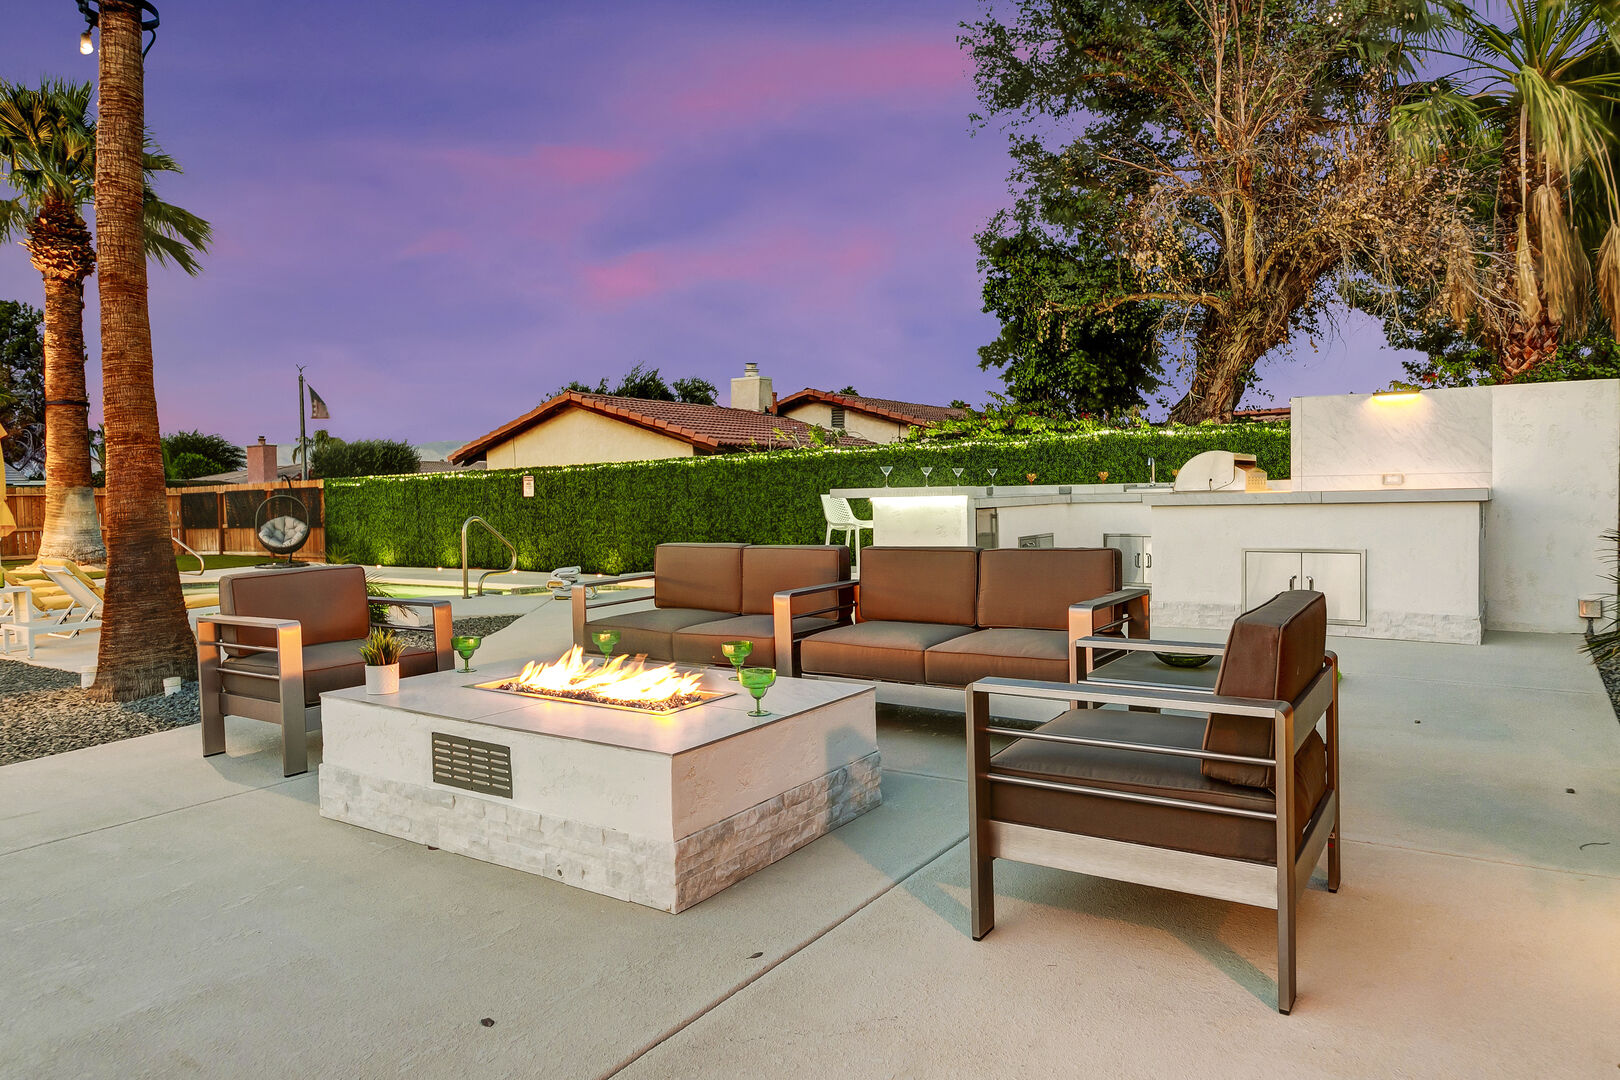 Gather around the fire pit with seating for six.